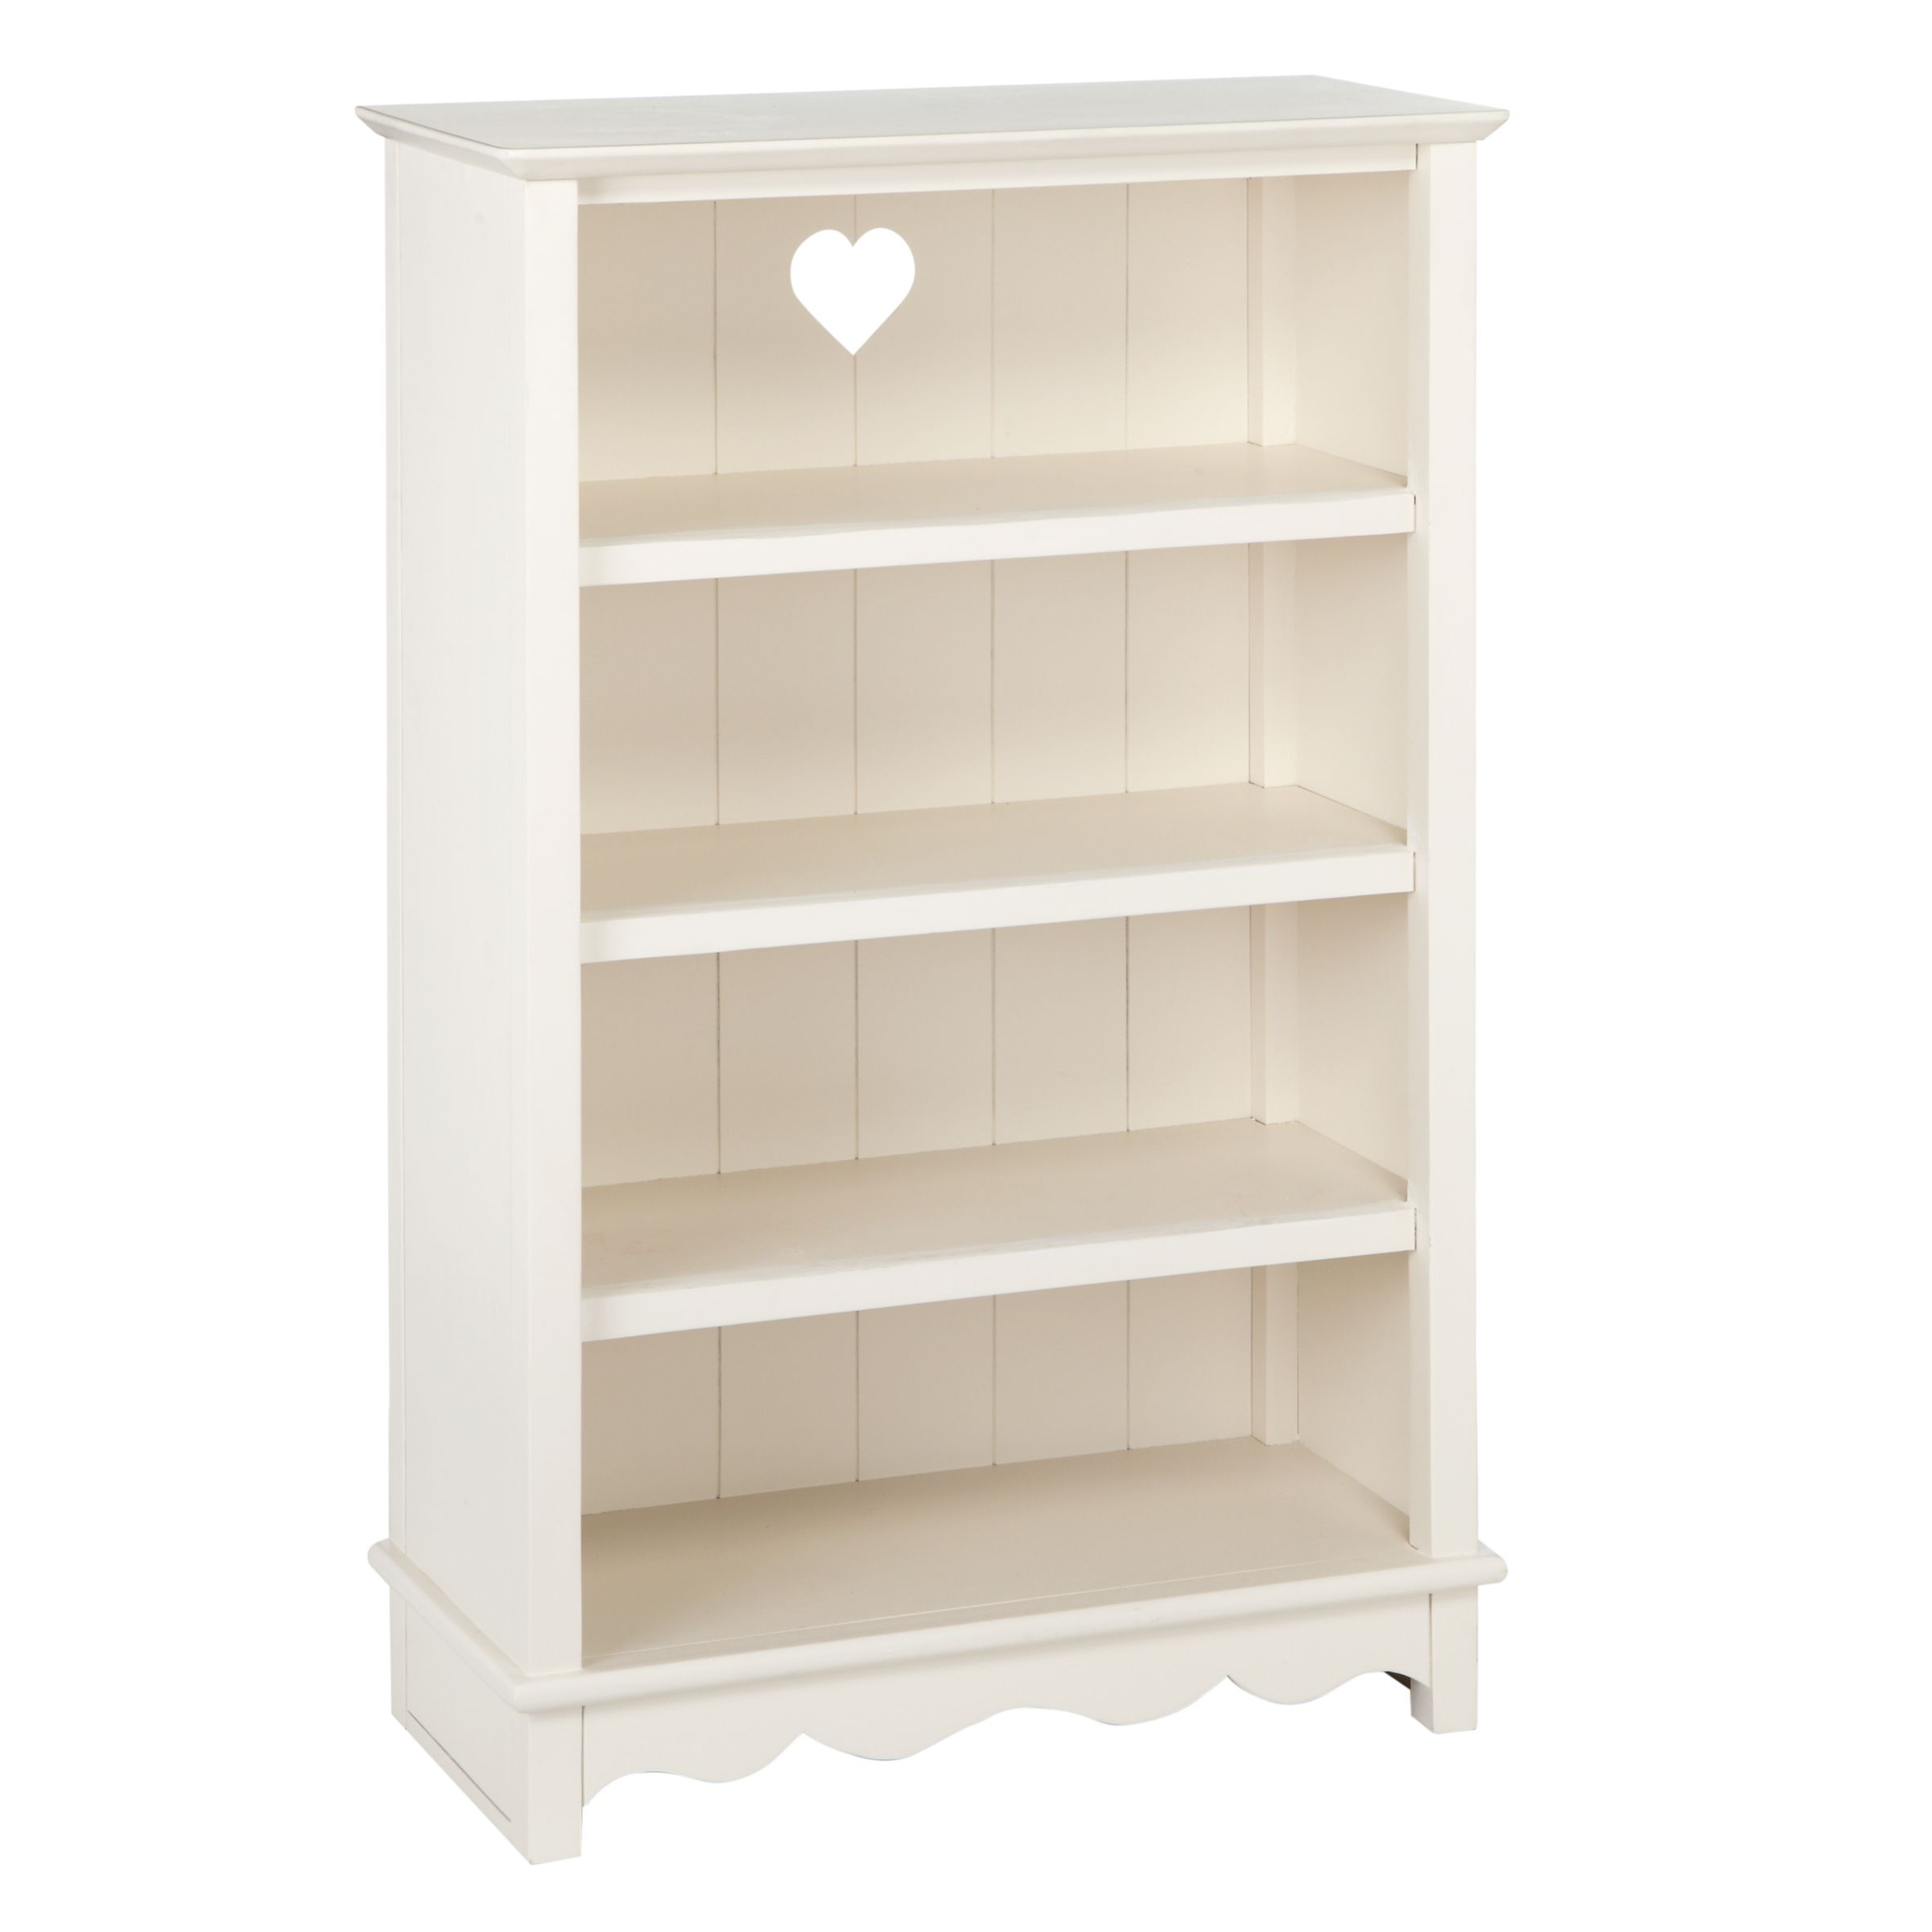 Childrens Bookcases John Lewis Partners, Small Wooden Childrens Bookcase